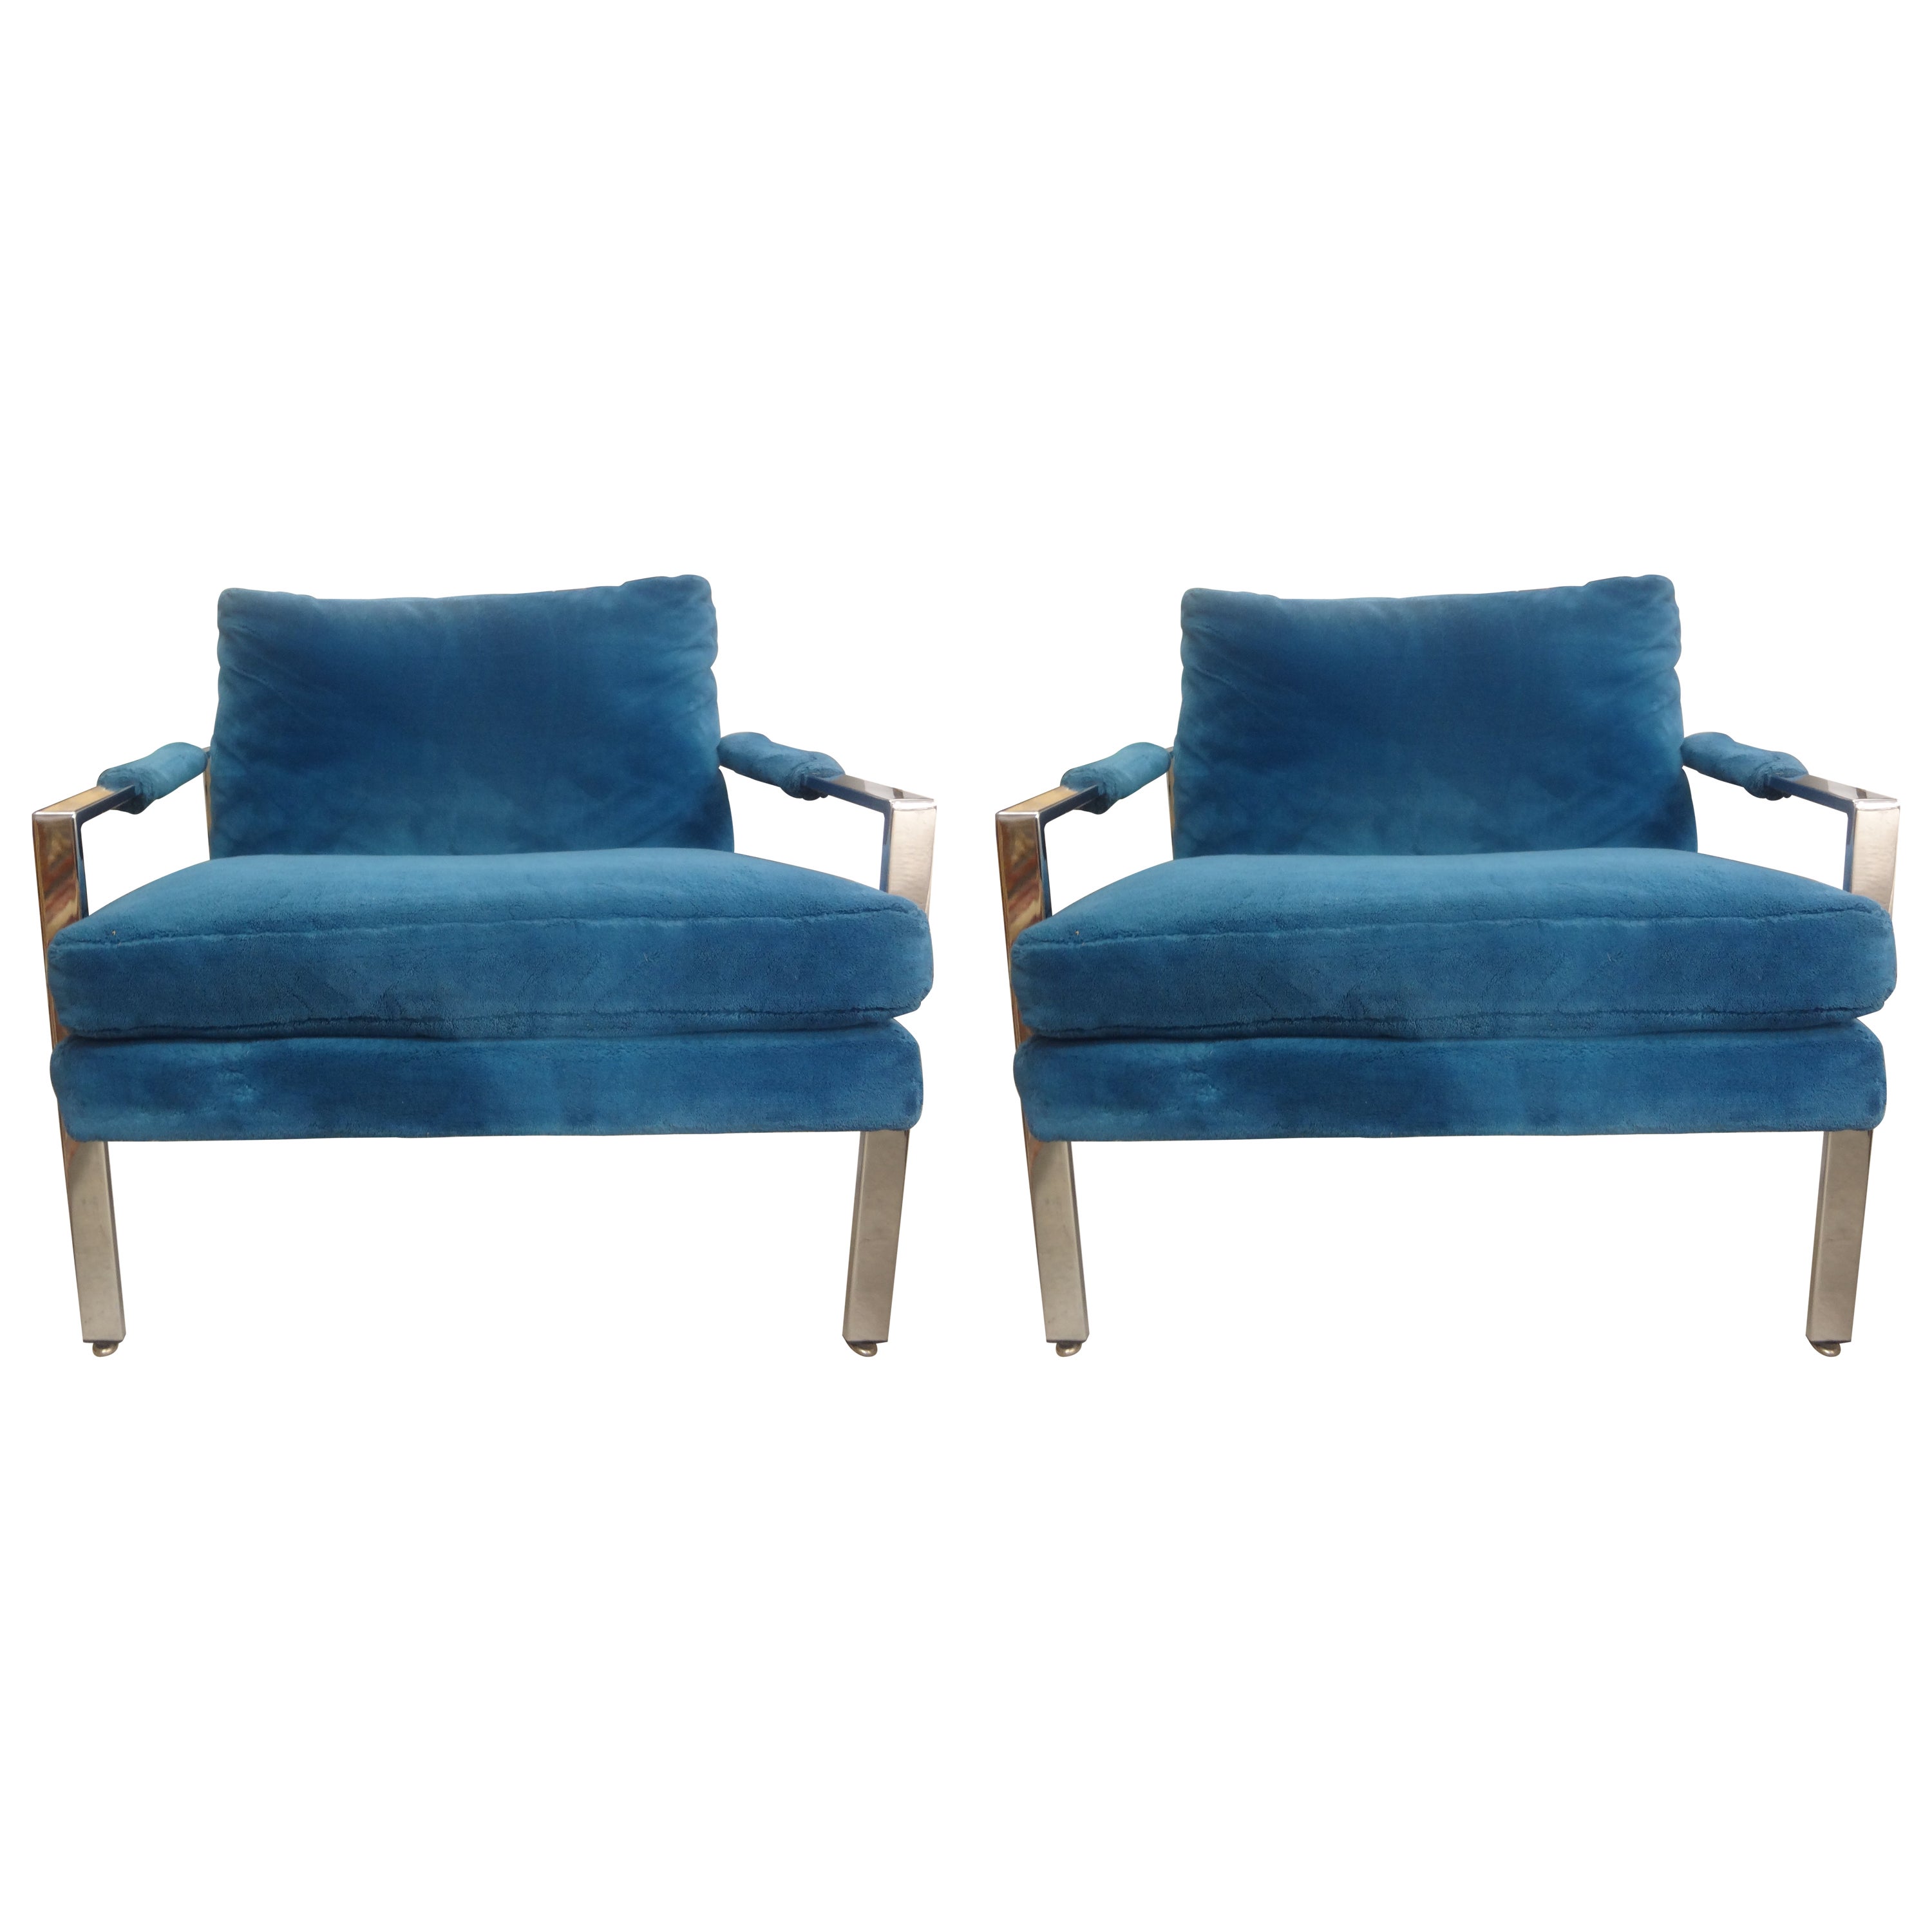 Pair Of Milo Baughman For Thayer Coggin Chrome Lounge Chairs For Sale